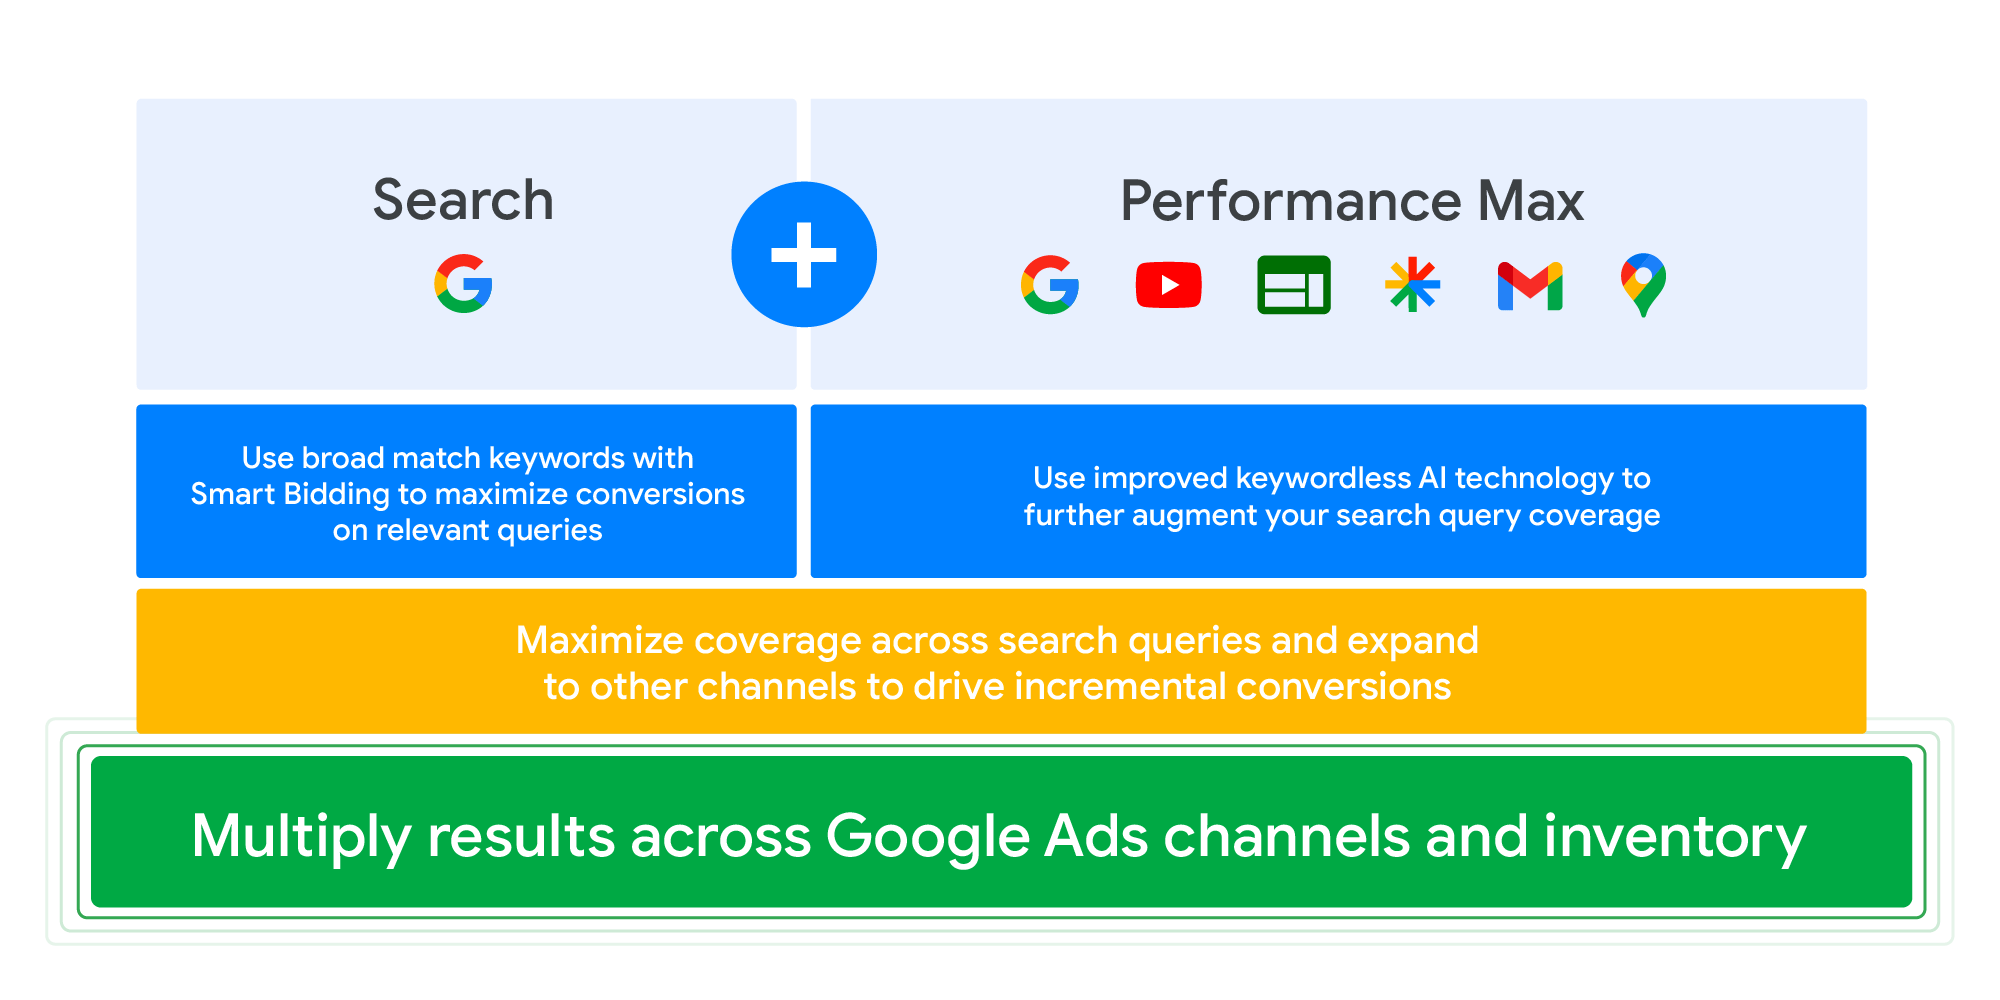 Comparison between two campaigns Google shopping ads and pERFORMACNE mAX CAMPAIGN